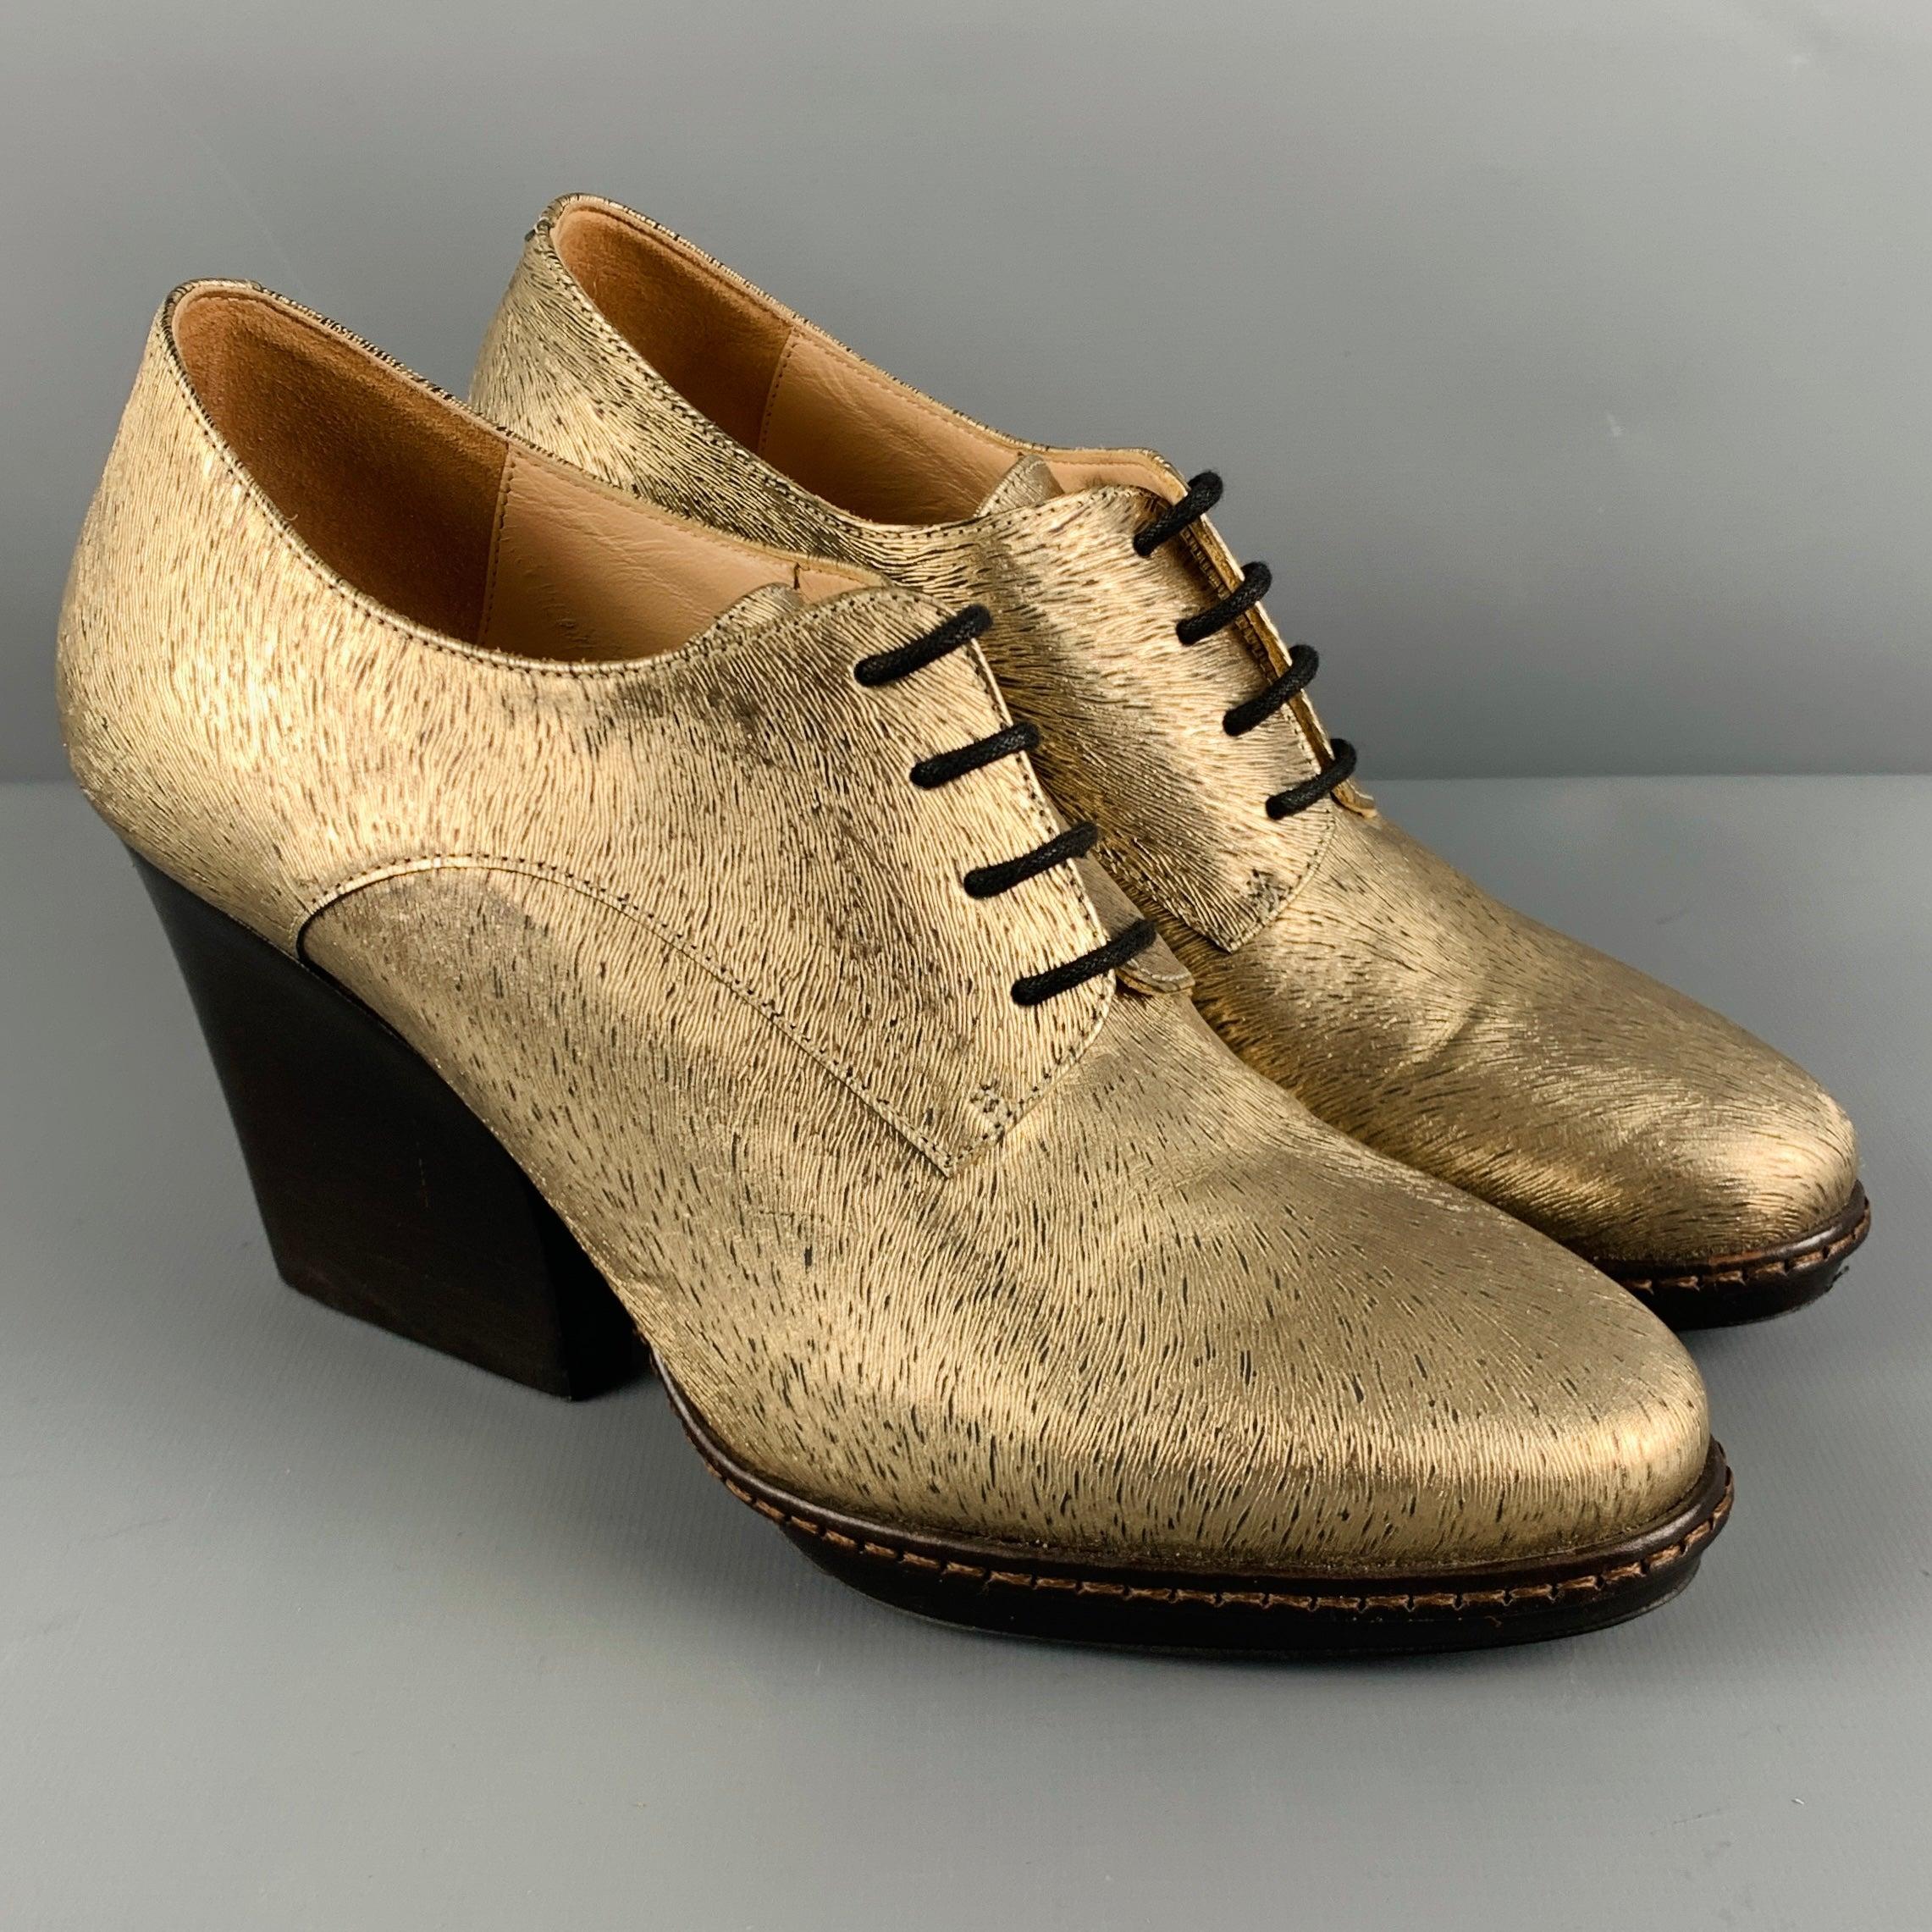 DRIES VAN NOTEN booties
in a metallic gold and brown fabric featuring a textured animal print pattern, platform with chunky heel, and lace-up closure.
Made in Italy.Very Good Pre-Owned Condition. Scuff mark on back of left shoe. 

Marked:   14760